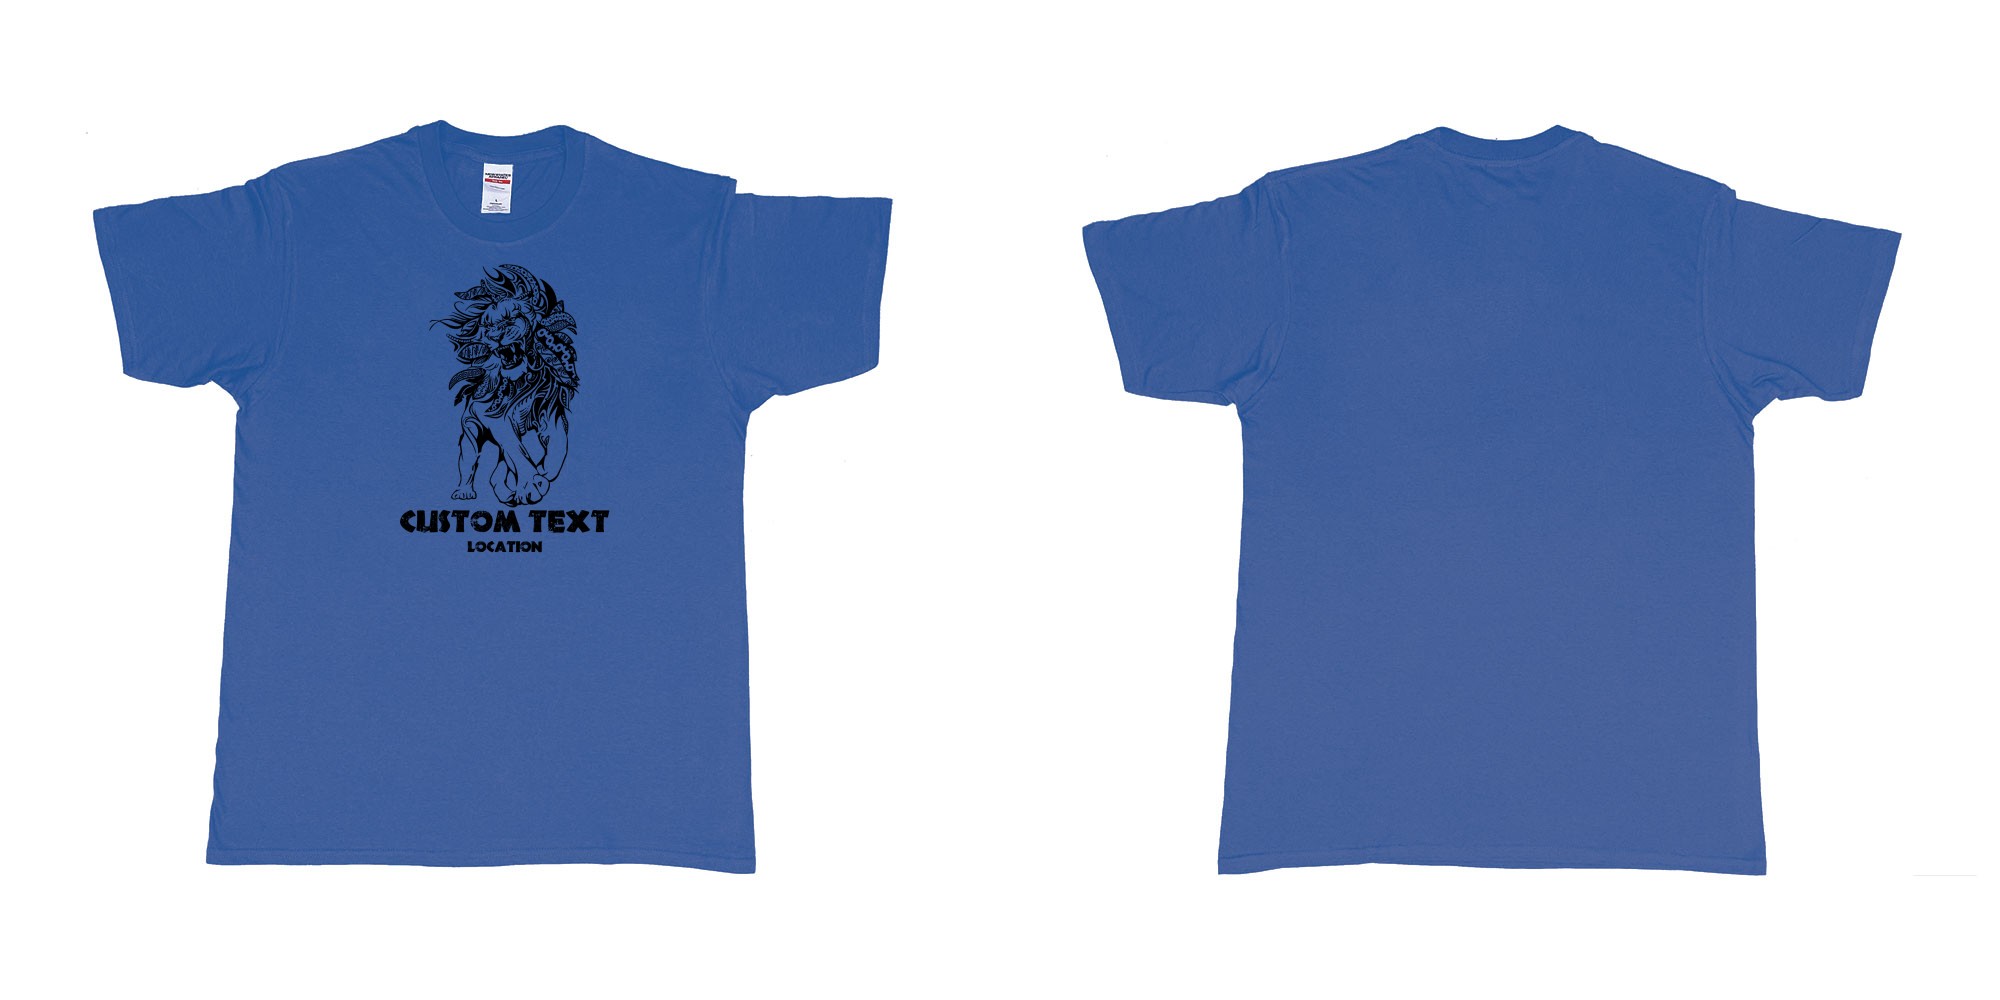 Custom tshirt design lion august tribal in fabric color royal-blue choice your own text made in Bali by The Pirate Way